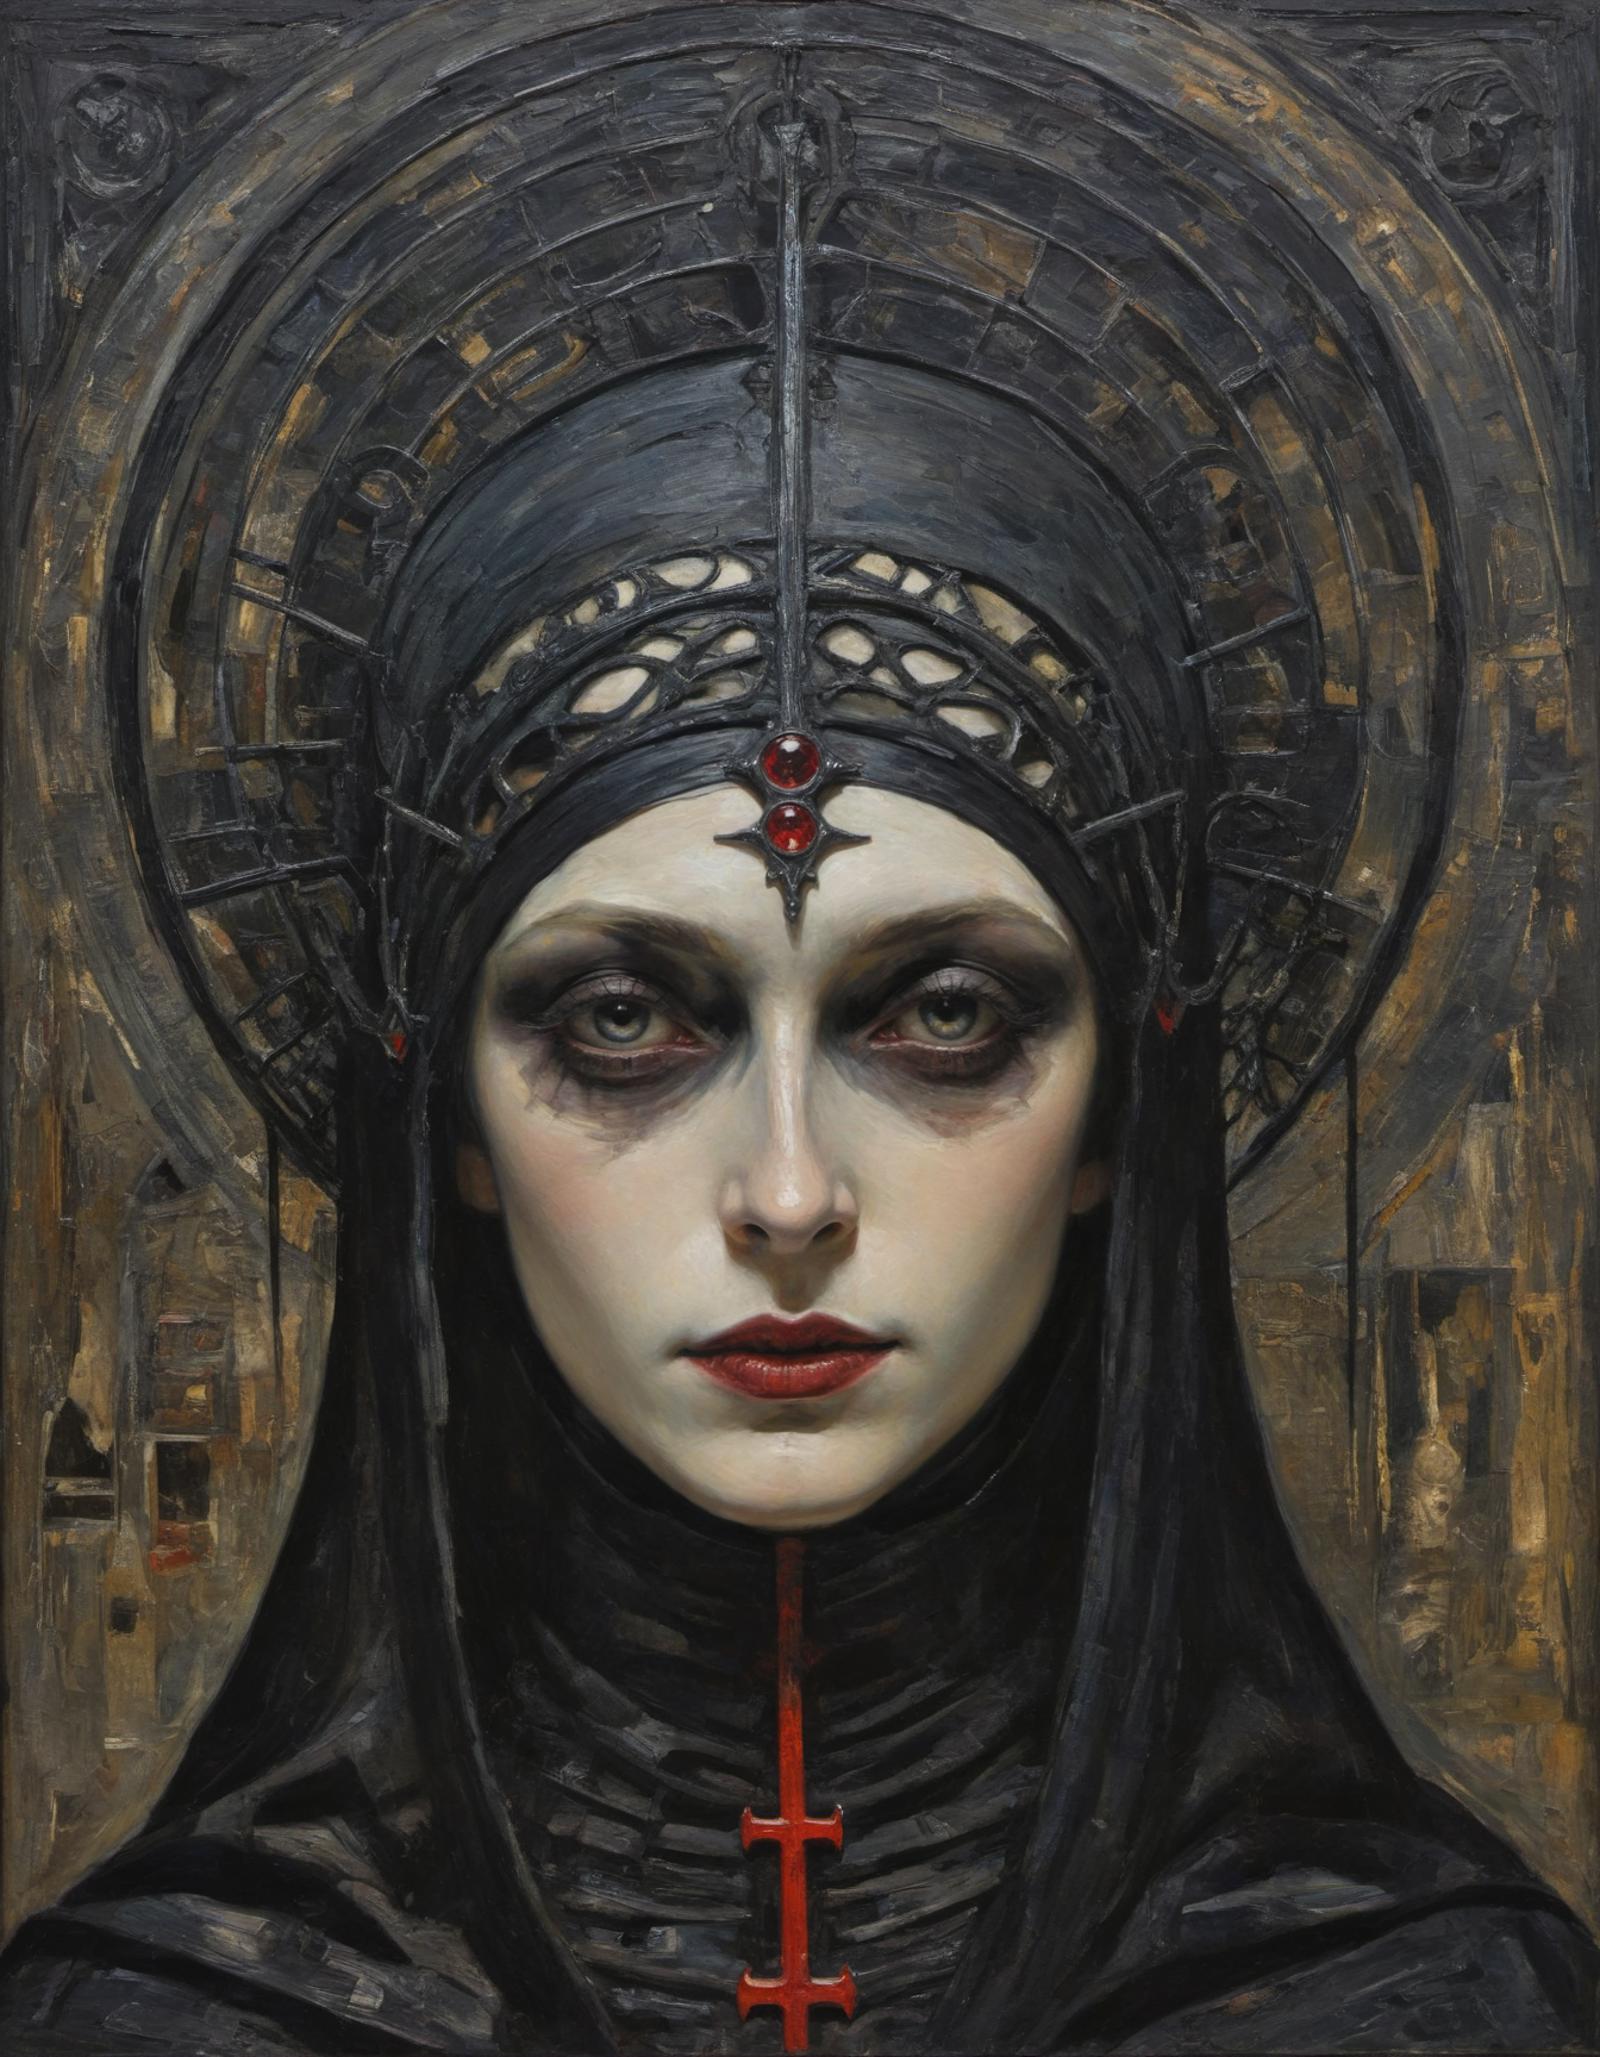 A portrait of a woman with a dark complexion, wearing a black veil, and a cross on her forehead. The image is a painting, and the woman appears to be looking into the distance.